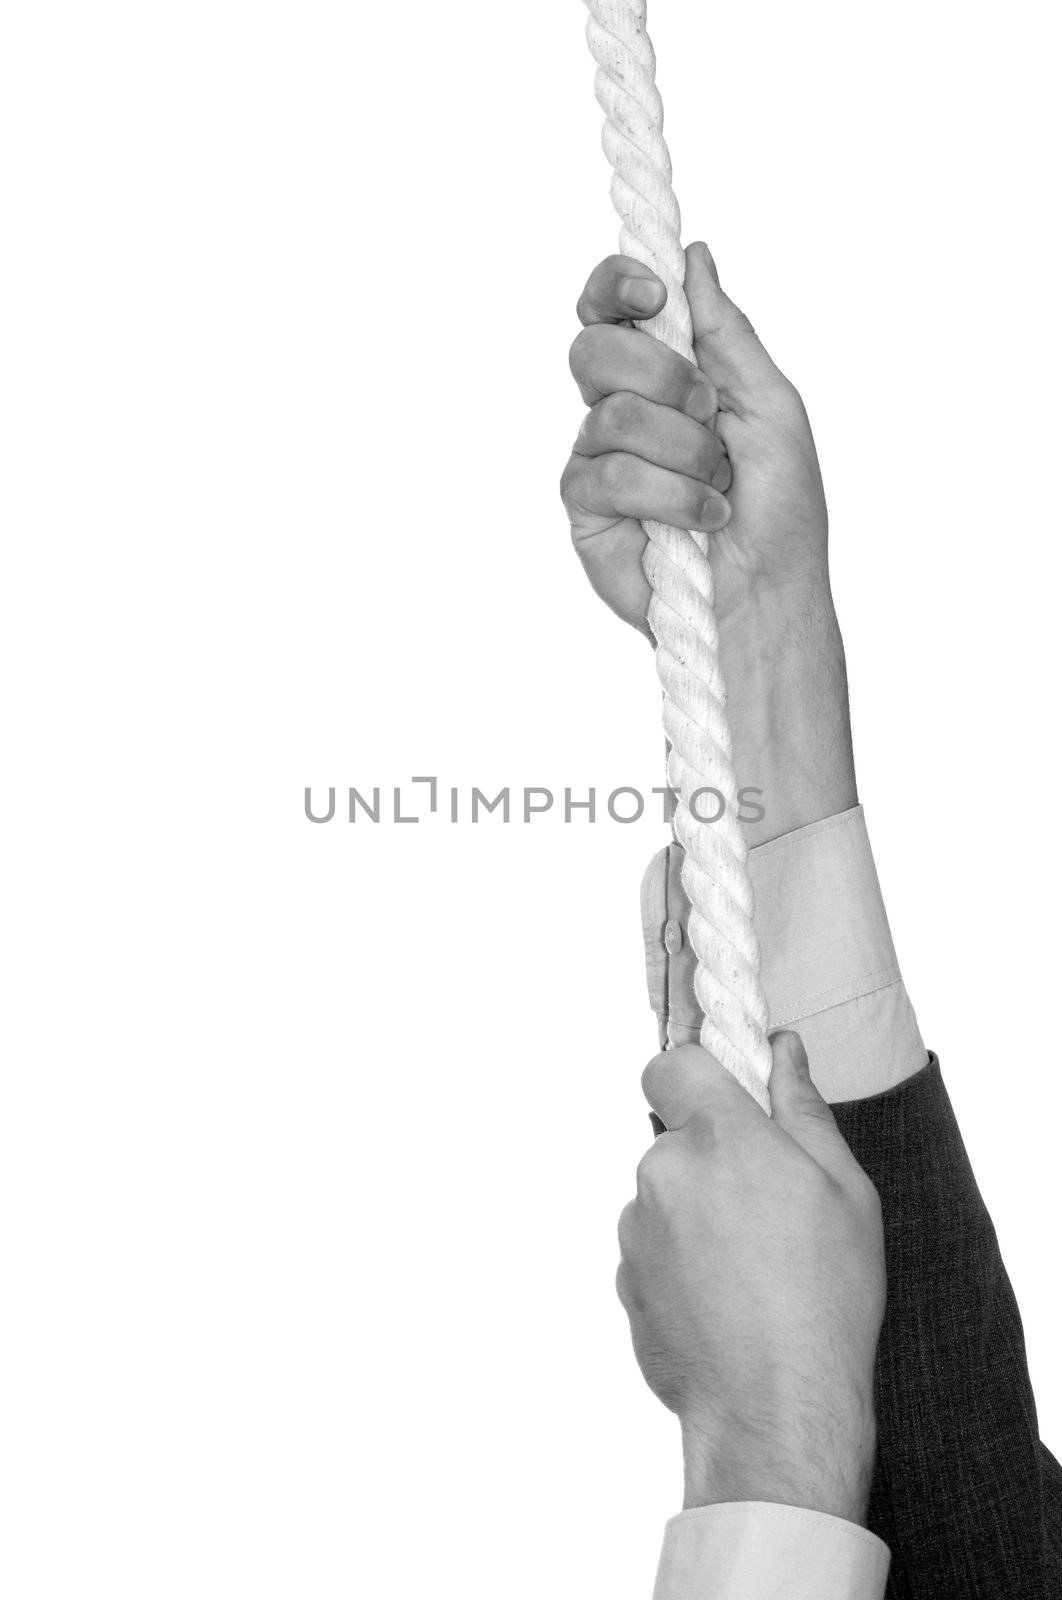 An image of hands pulling a tightrope